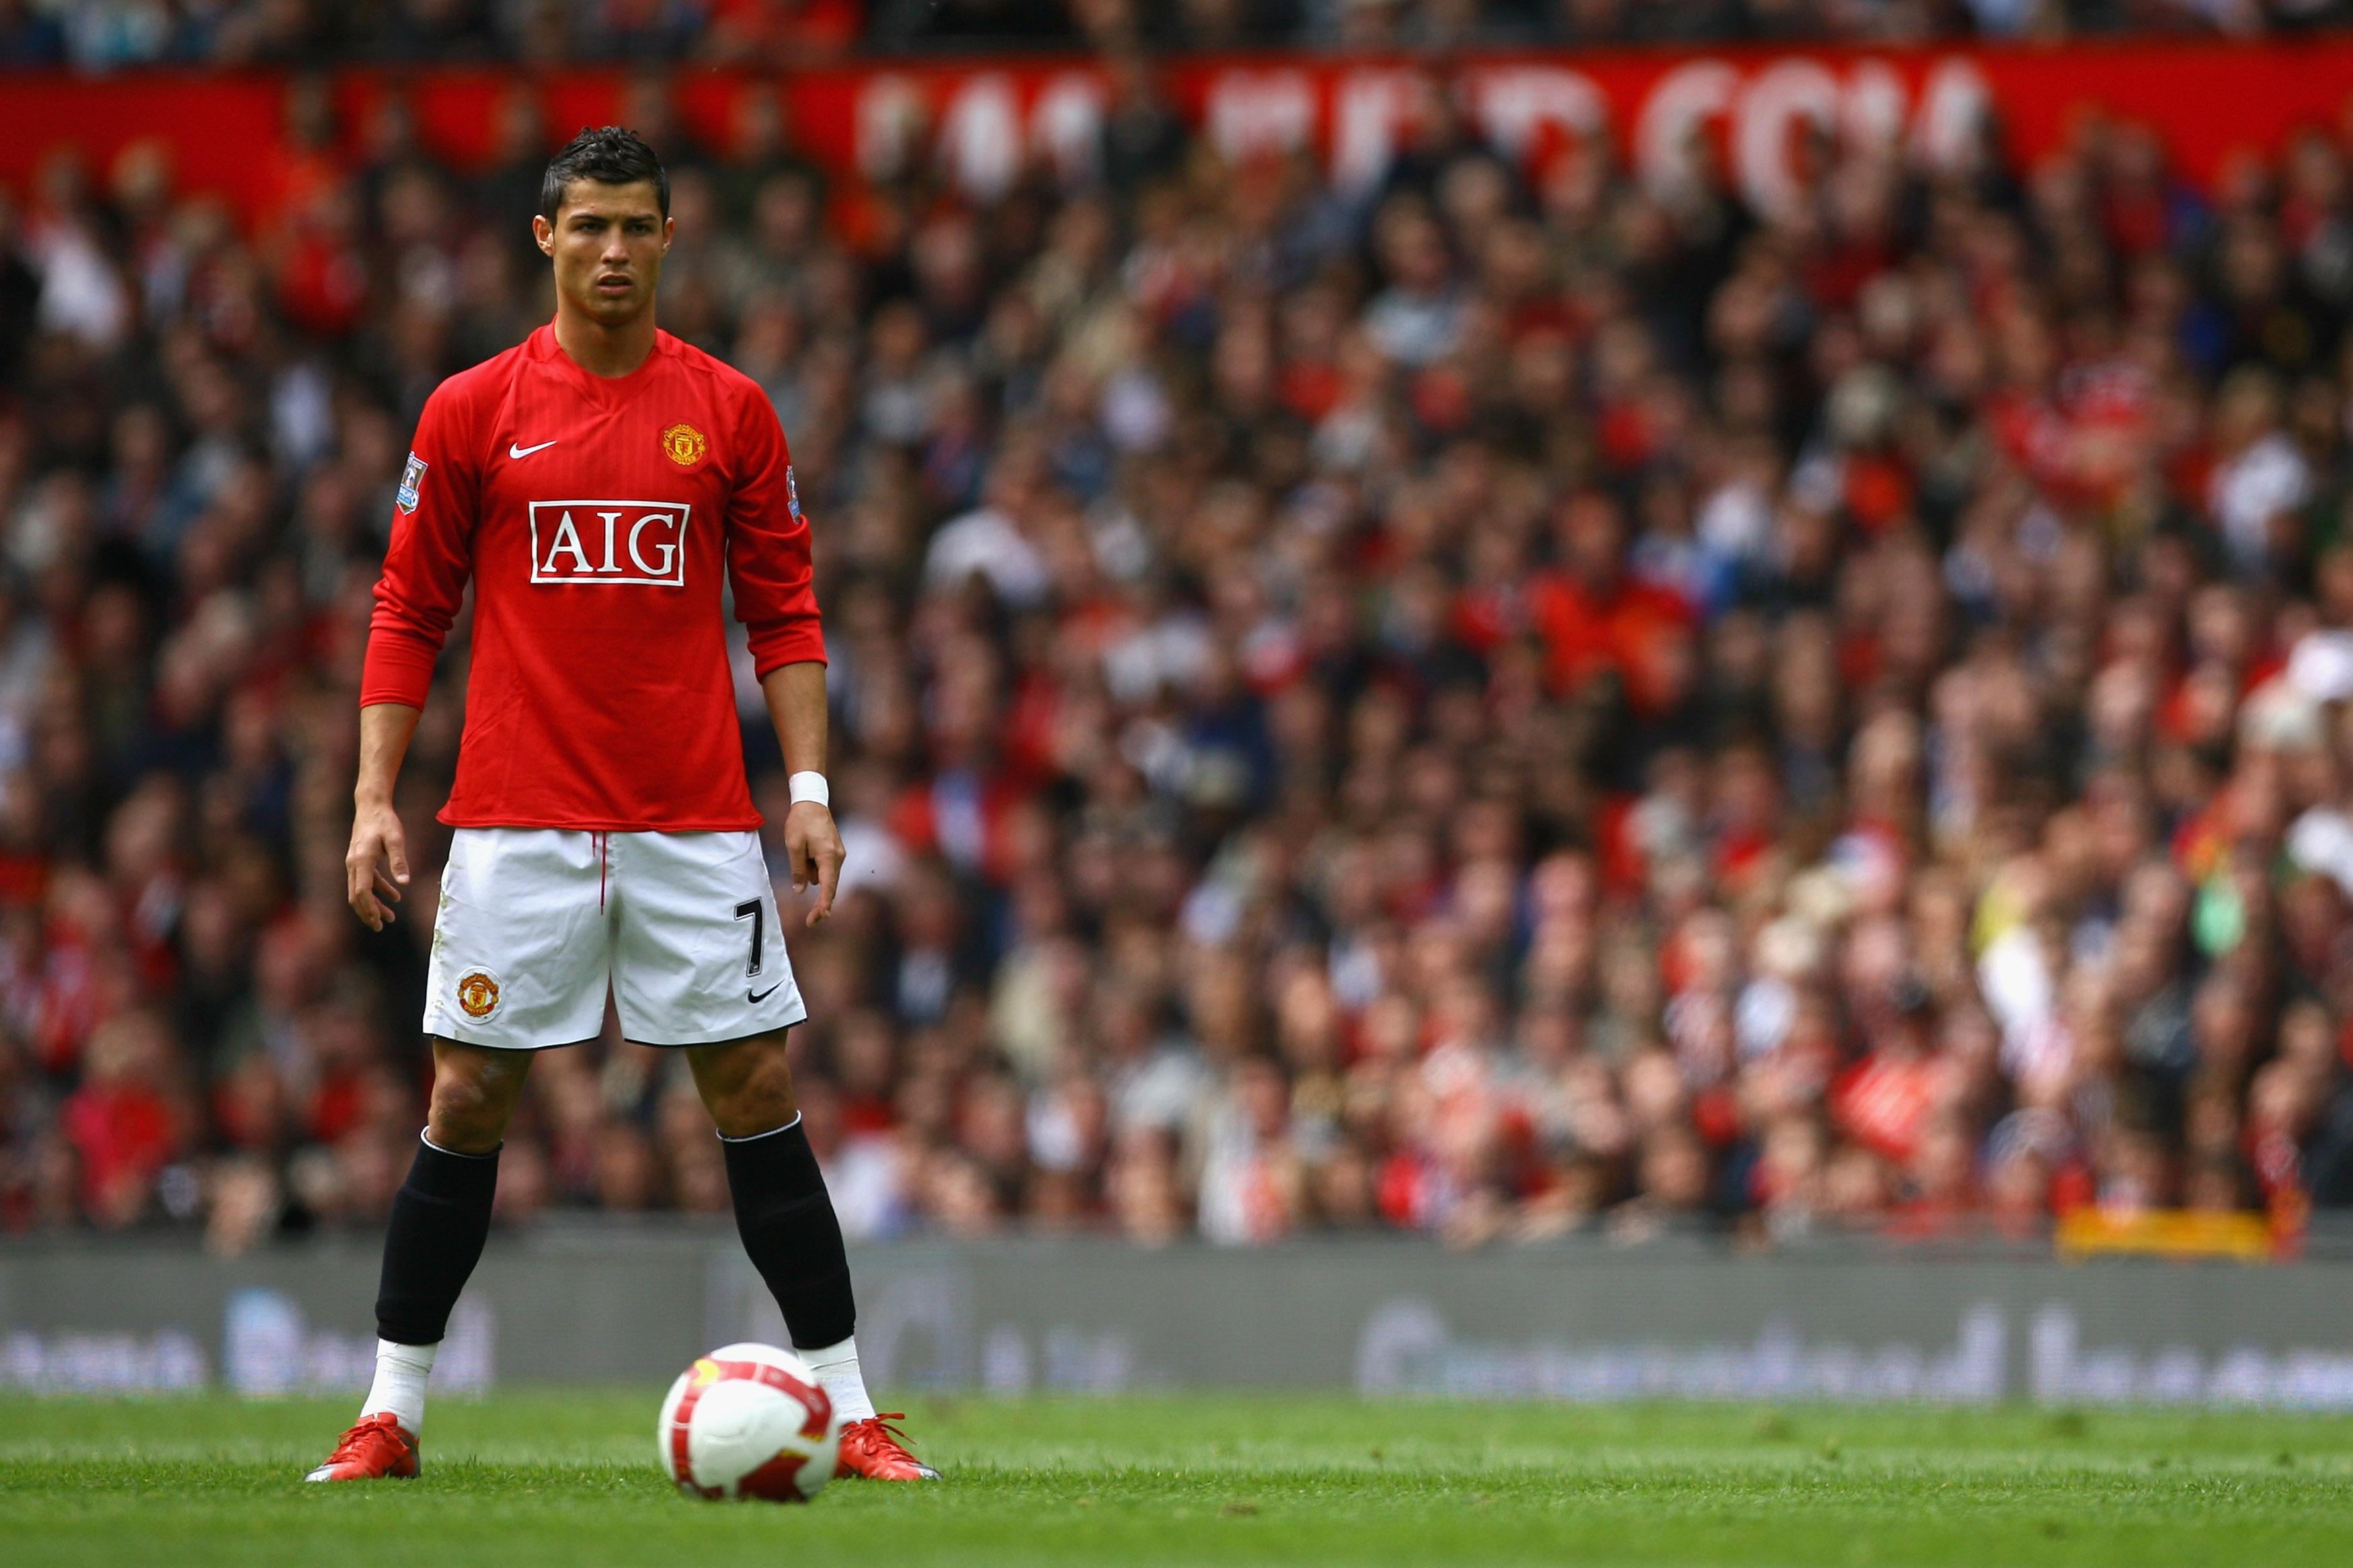 Cristiano Ronaldo of Manchester United lines up a free kick.